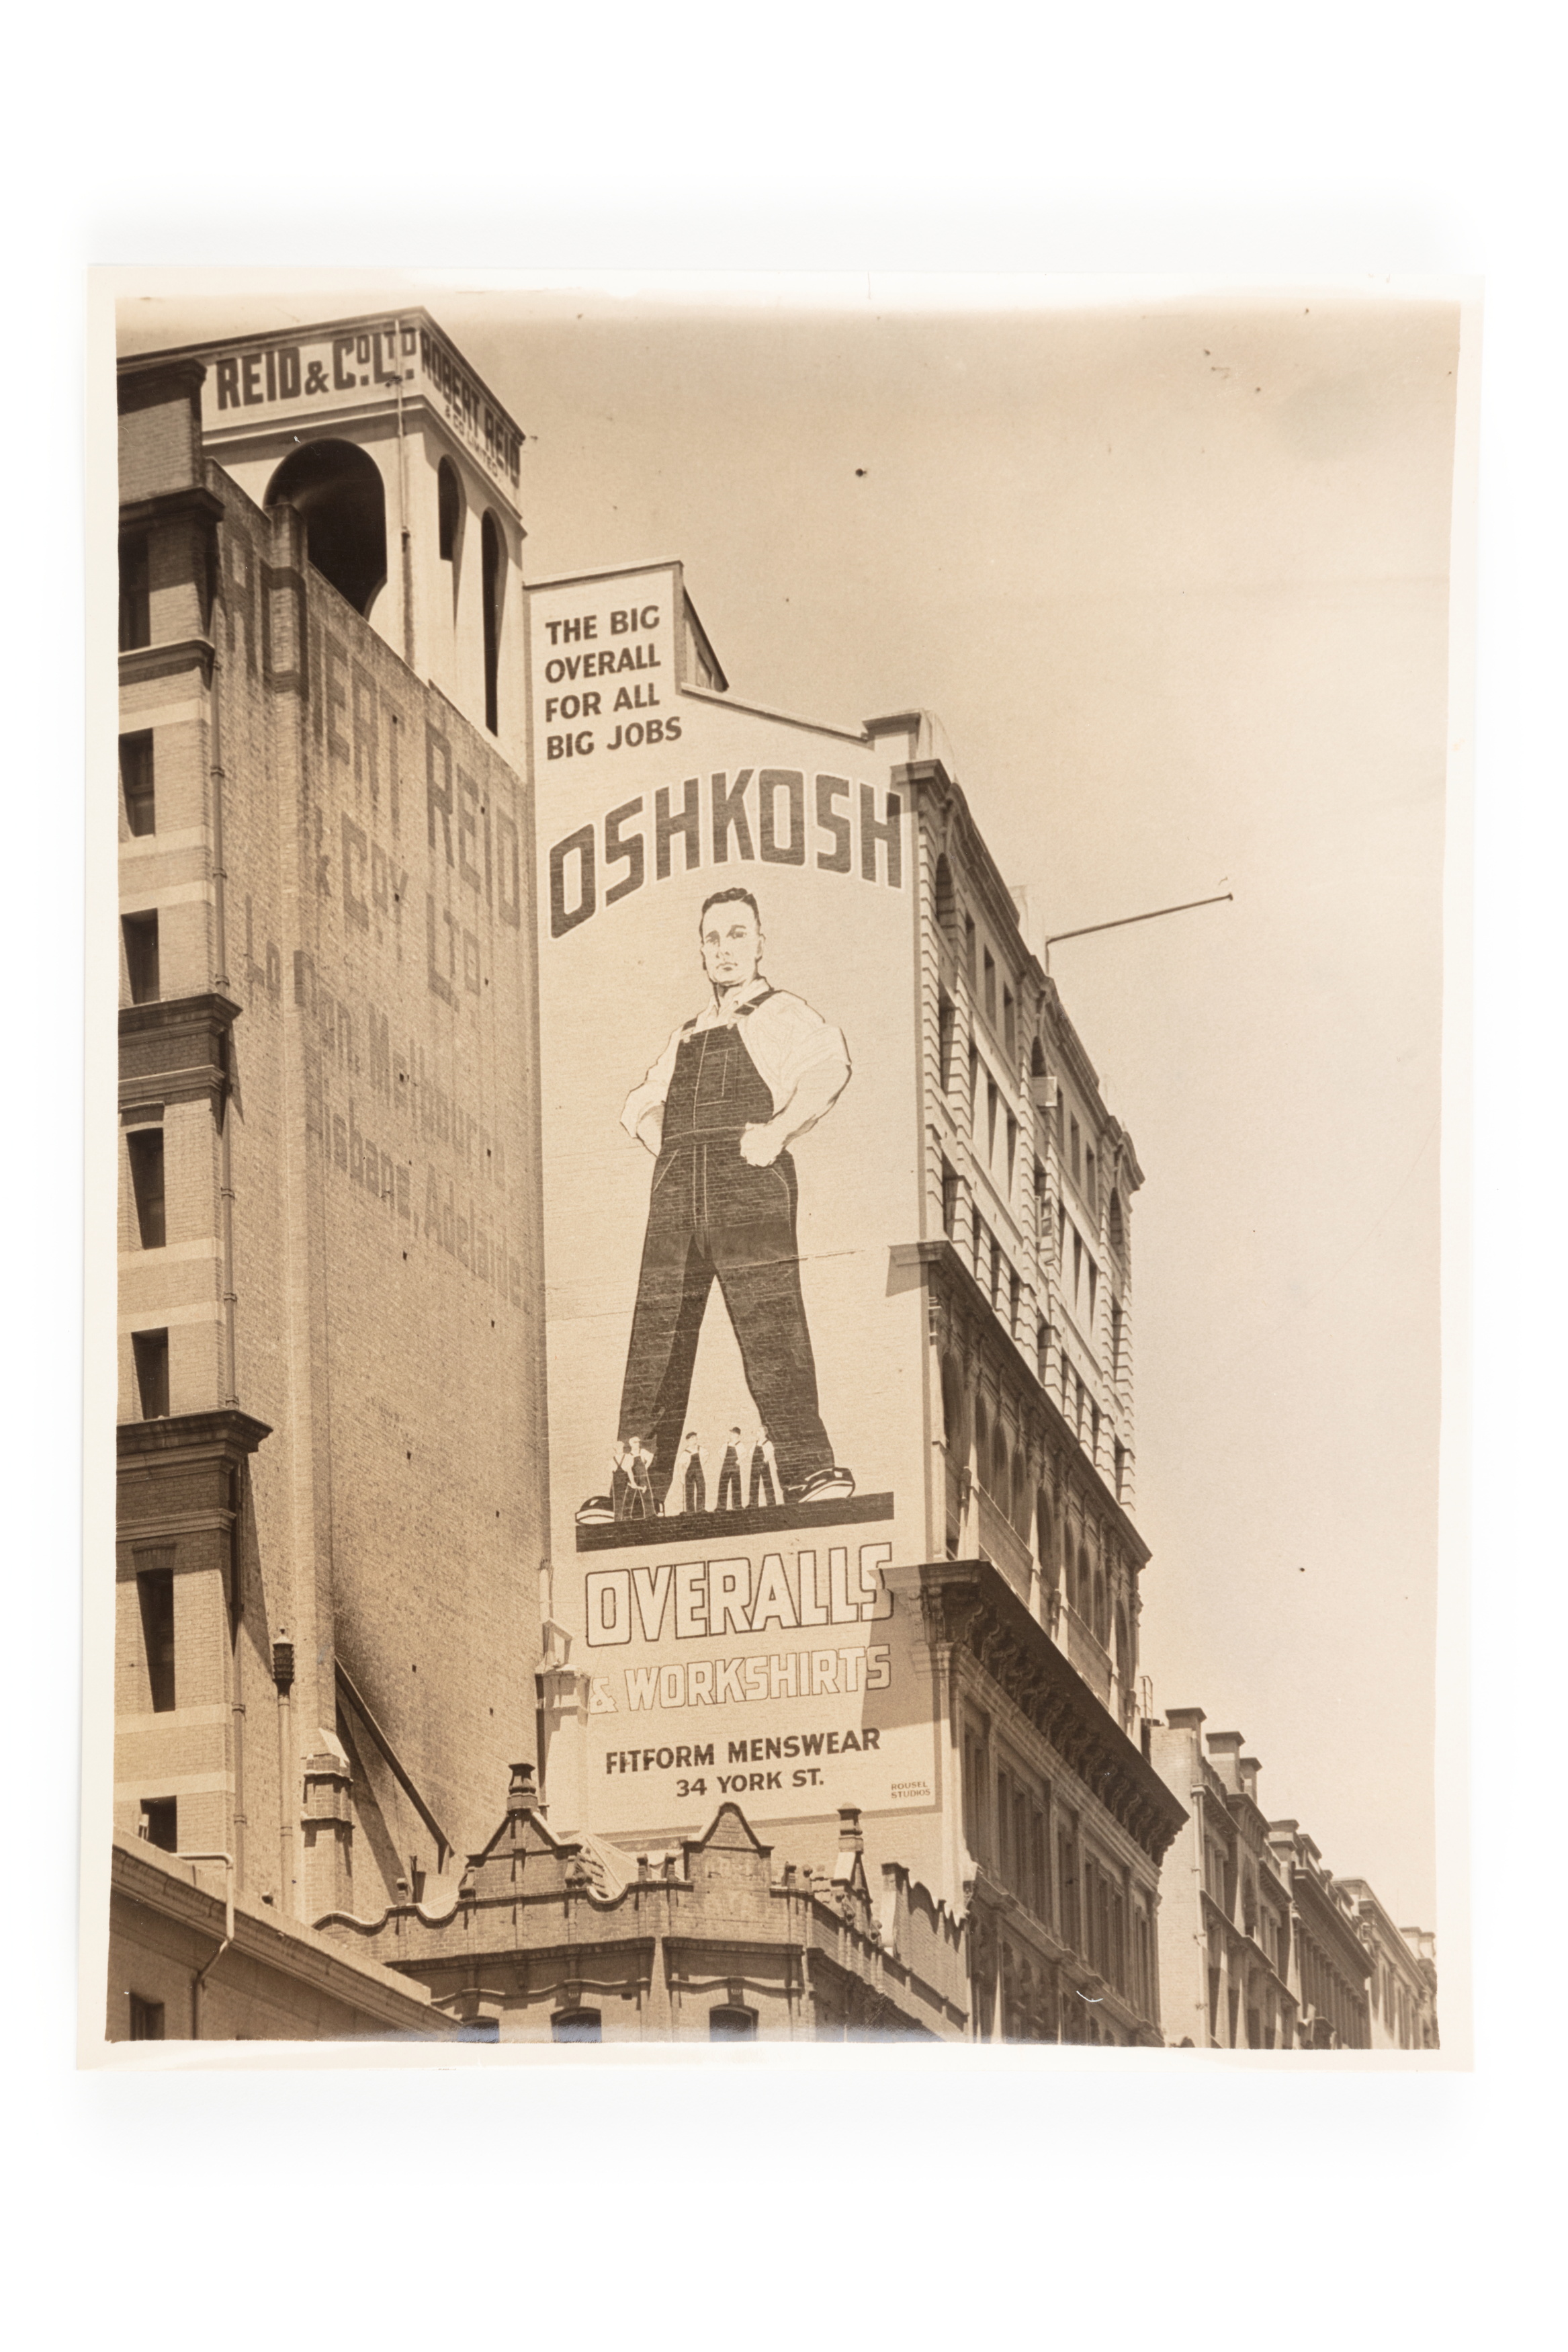 Photograph of large wall advertising sign for Fitform Menswear advertising Oskosh overalls and workshirts